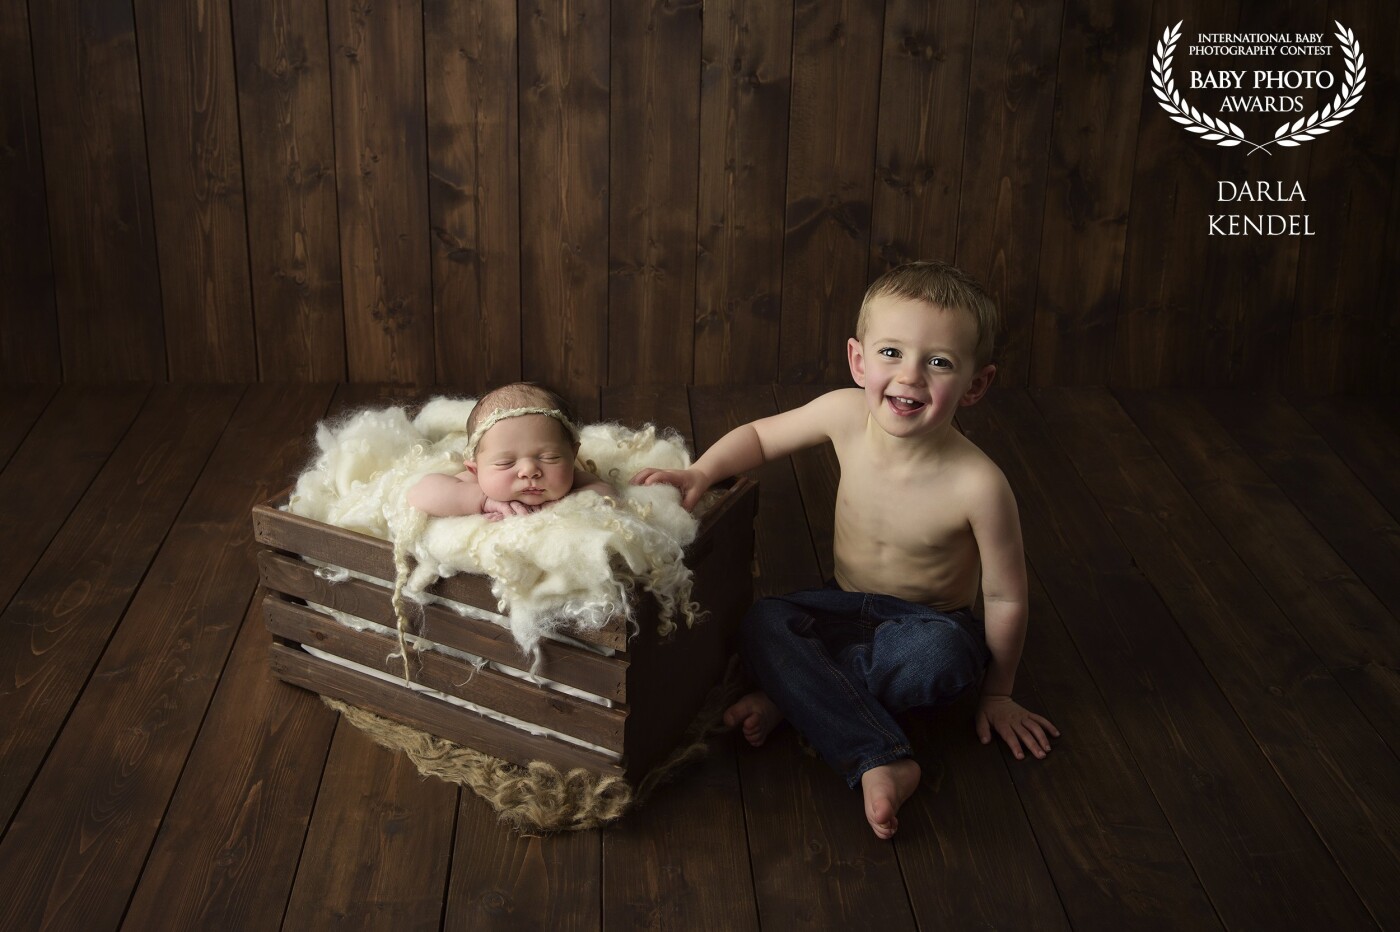 The BEST part about being a photographer is when your babies grow up and return later as an older sibling! This is a full circle moment right here....2 years ago I captured this little guy's newborn portraits, and my heart just about exploded when I just got to photograph him with his new baby sister.